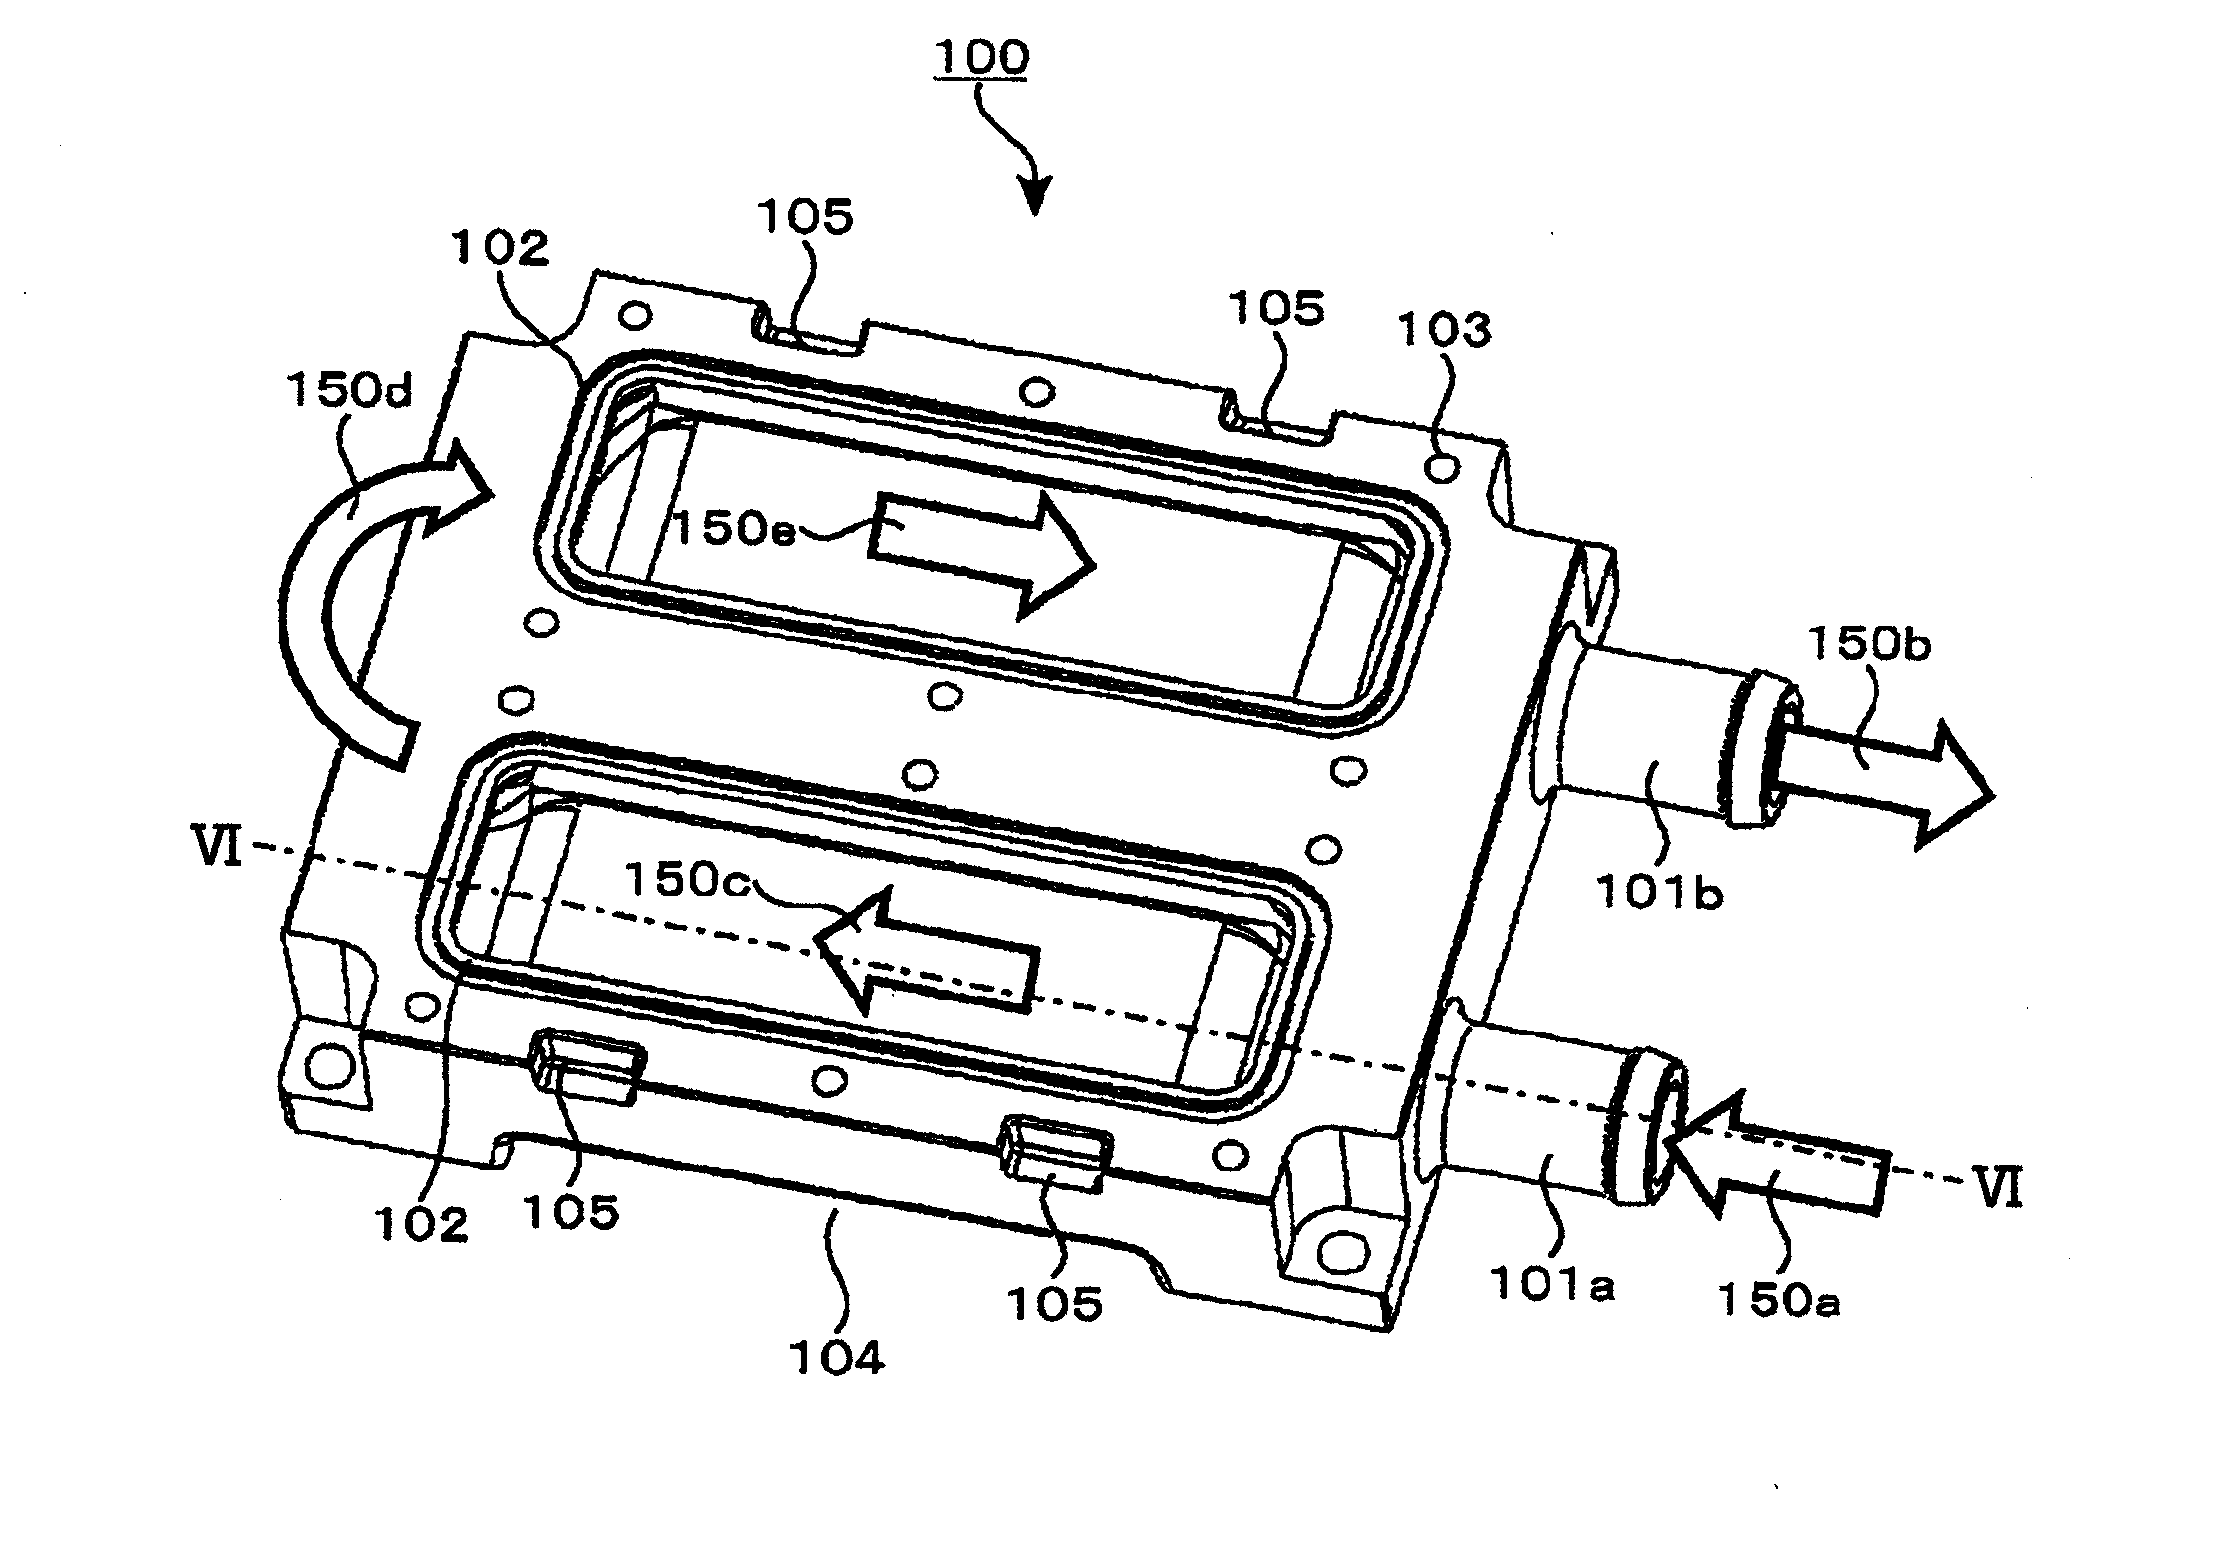 Semiconductor Power Module, Inverter/Converter Including the same, and Method of Manufacturing a Cooling Jacket for Semiconductor Power Module